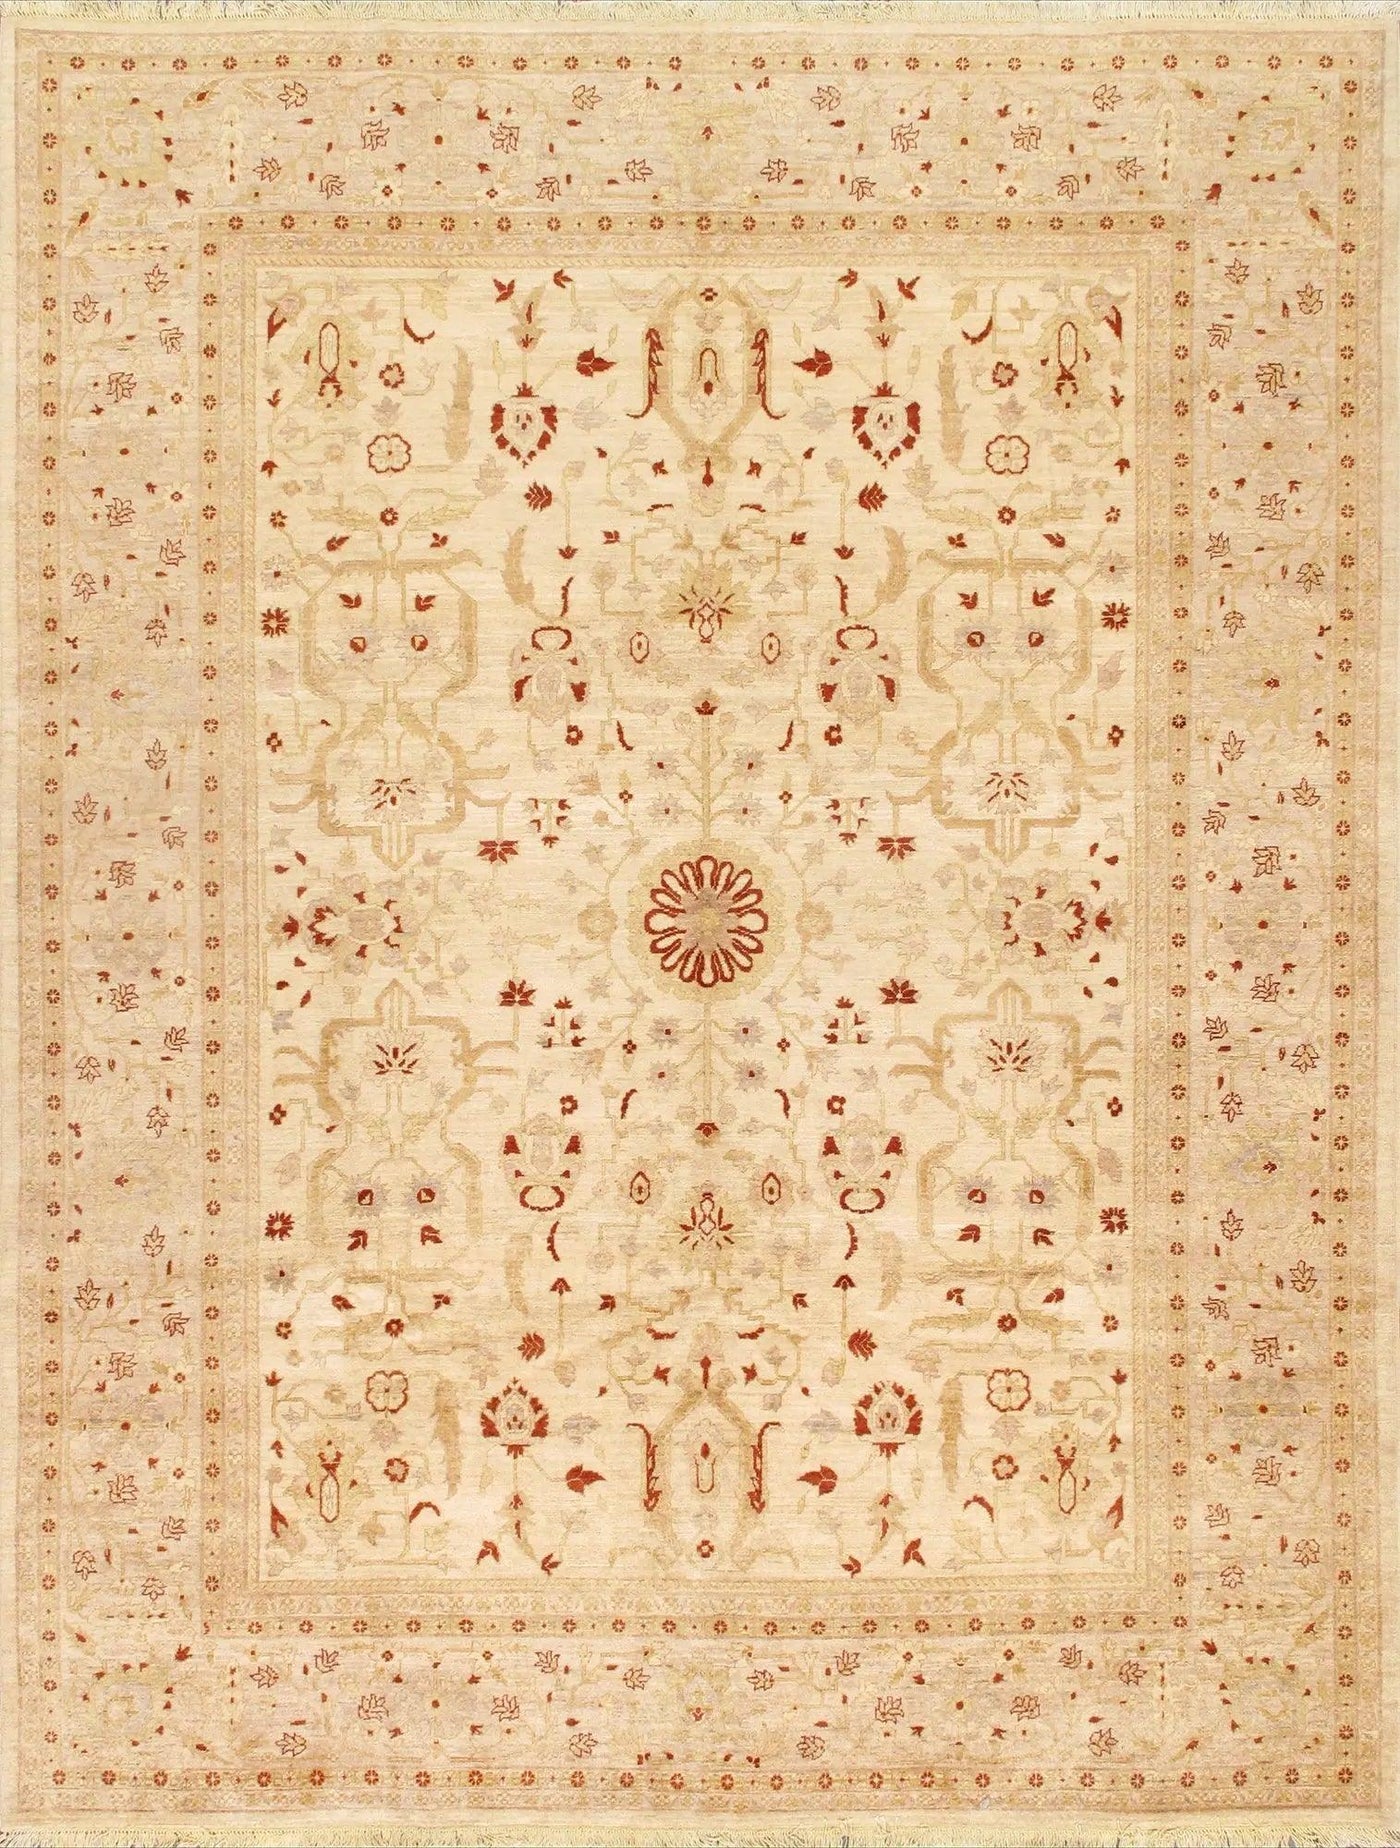 Canvello Nomad Art Collection Hand-Knotted Lamb's Wool Area Rug- 9'2" X 11'10"